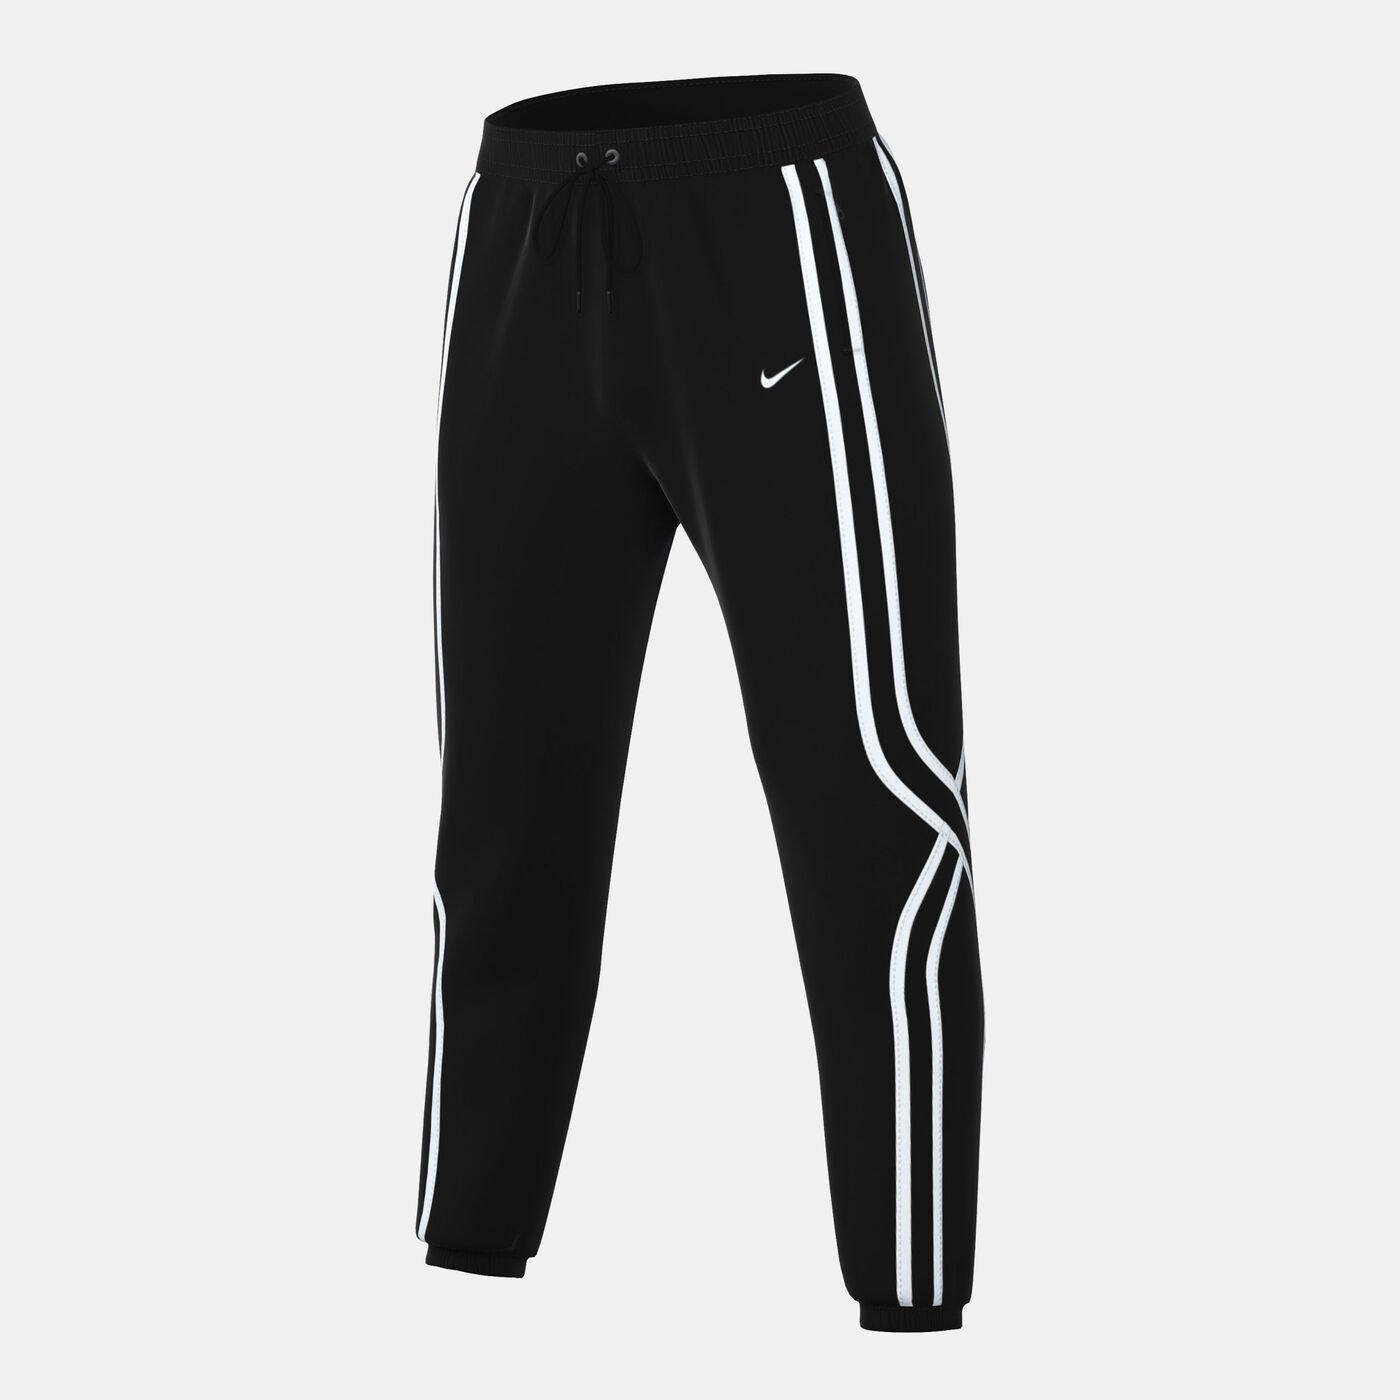 Men's DNA Crossover Dri-FIT Basketball Pants